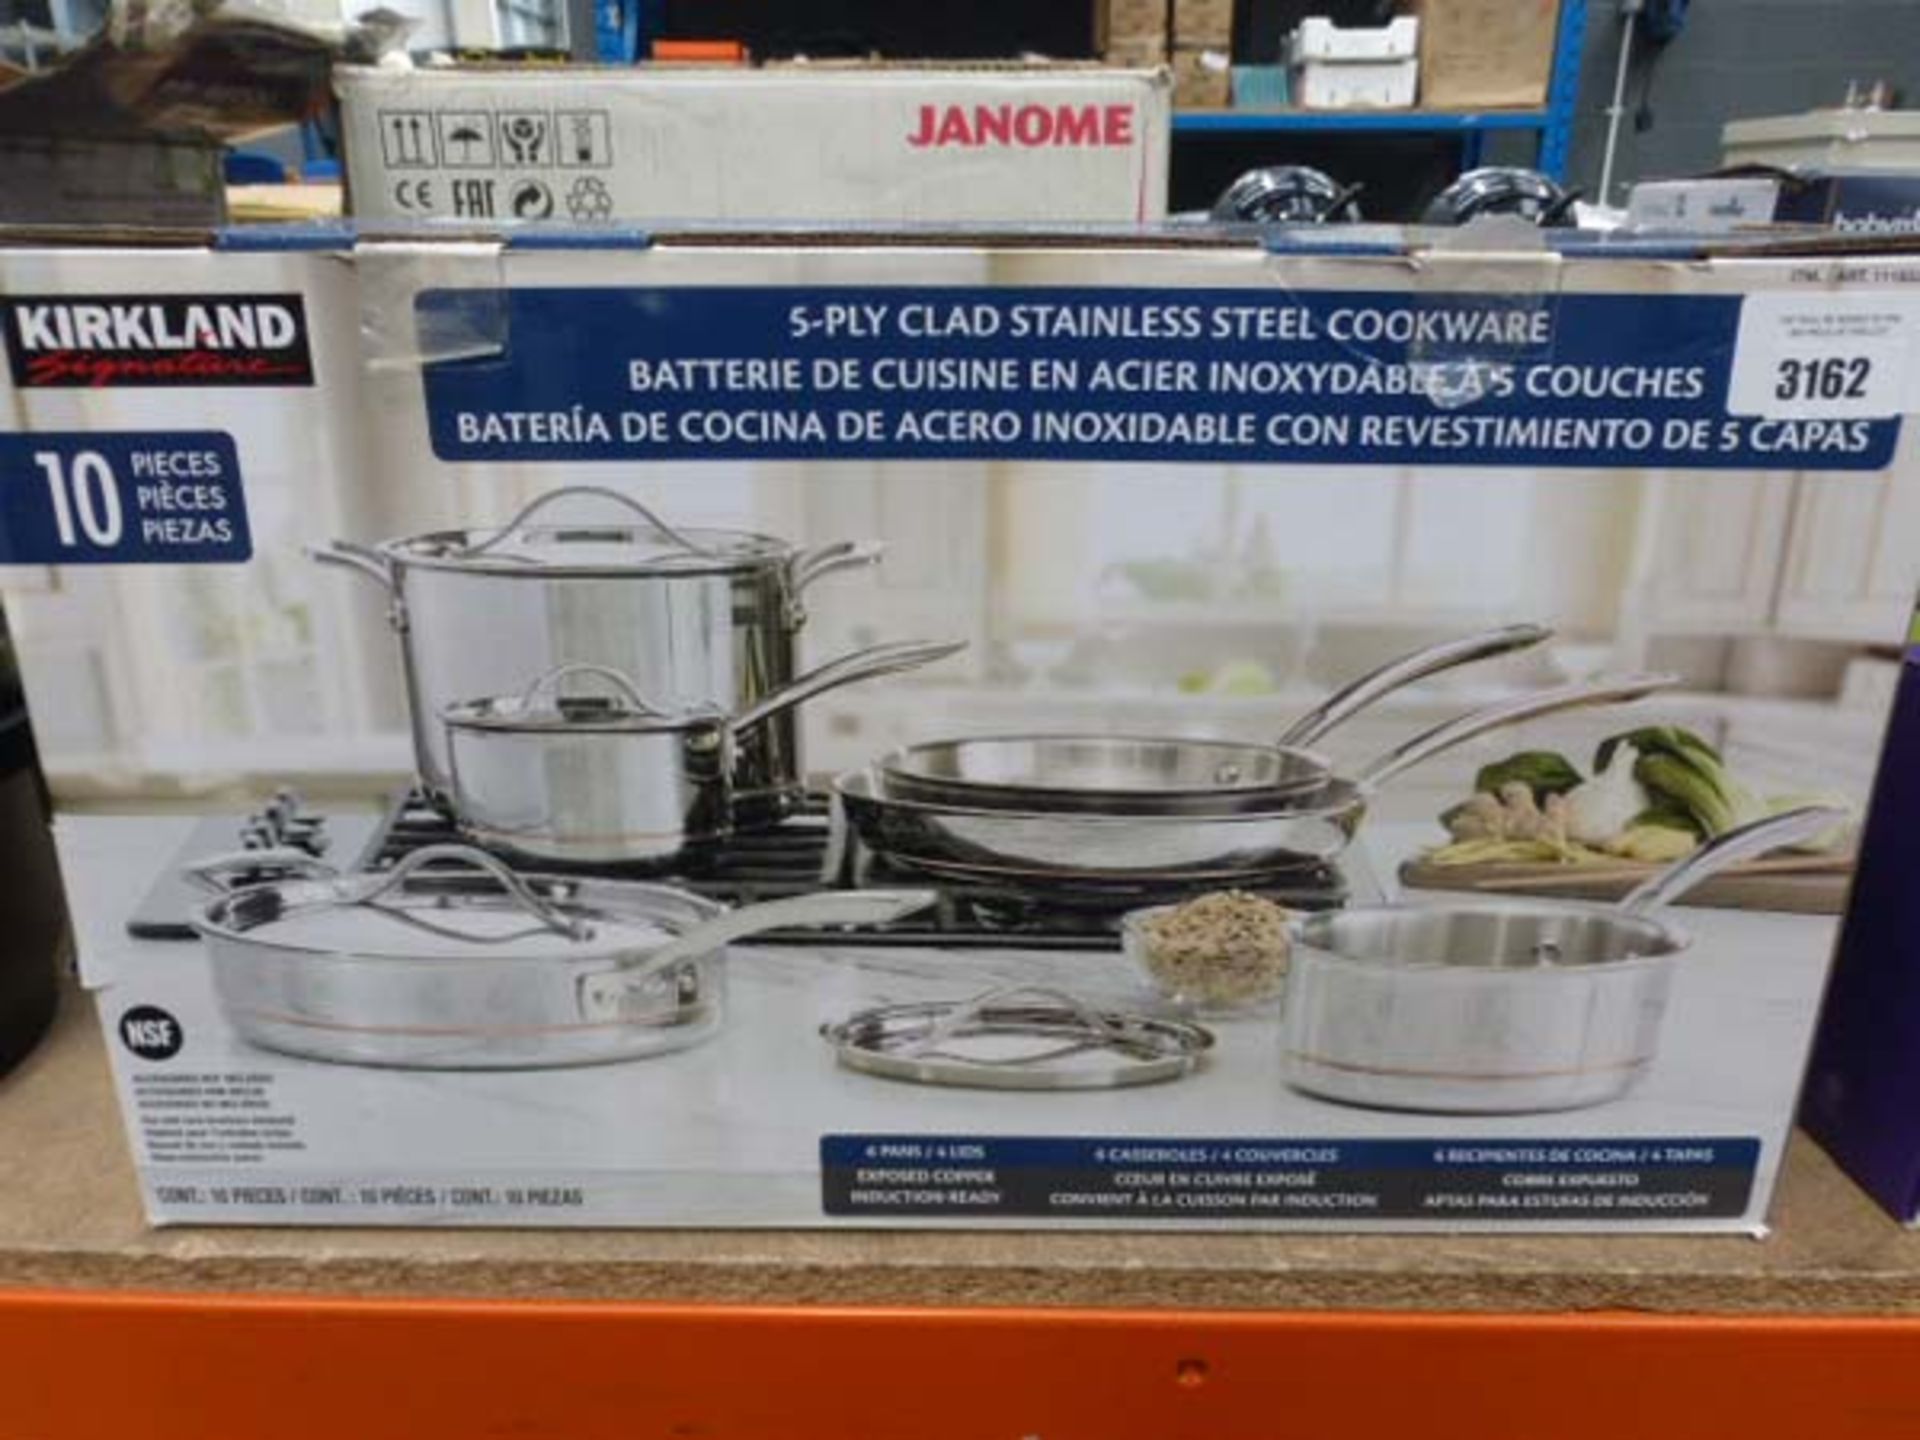 Kirkland stainless steel cookware set with box